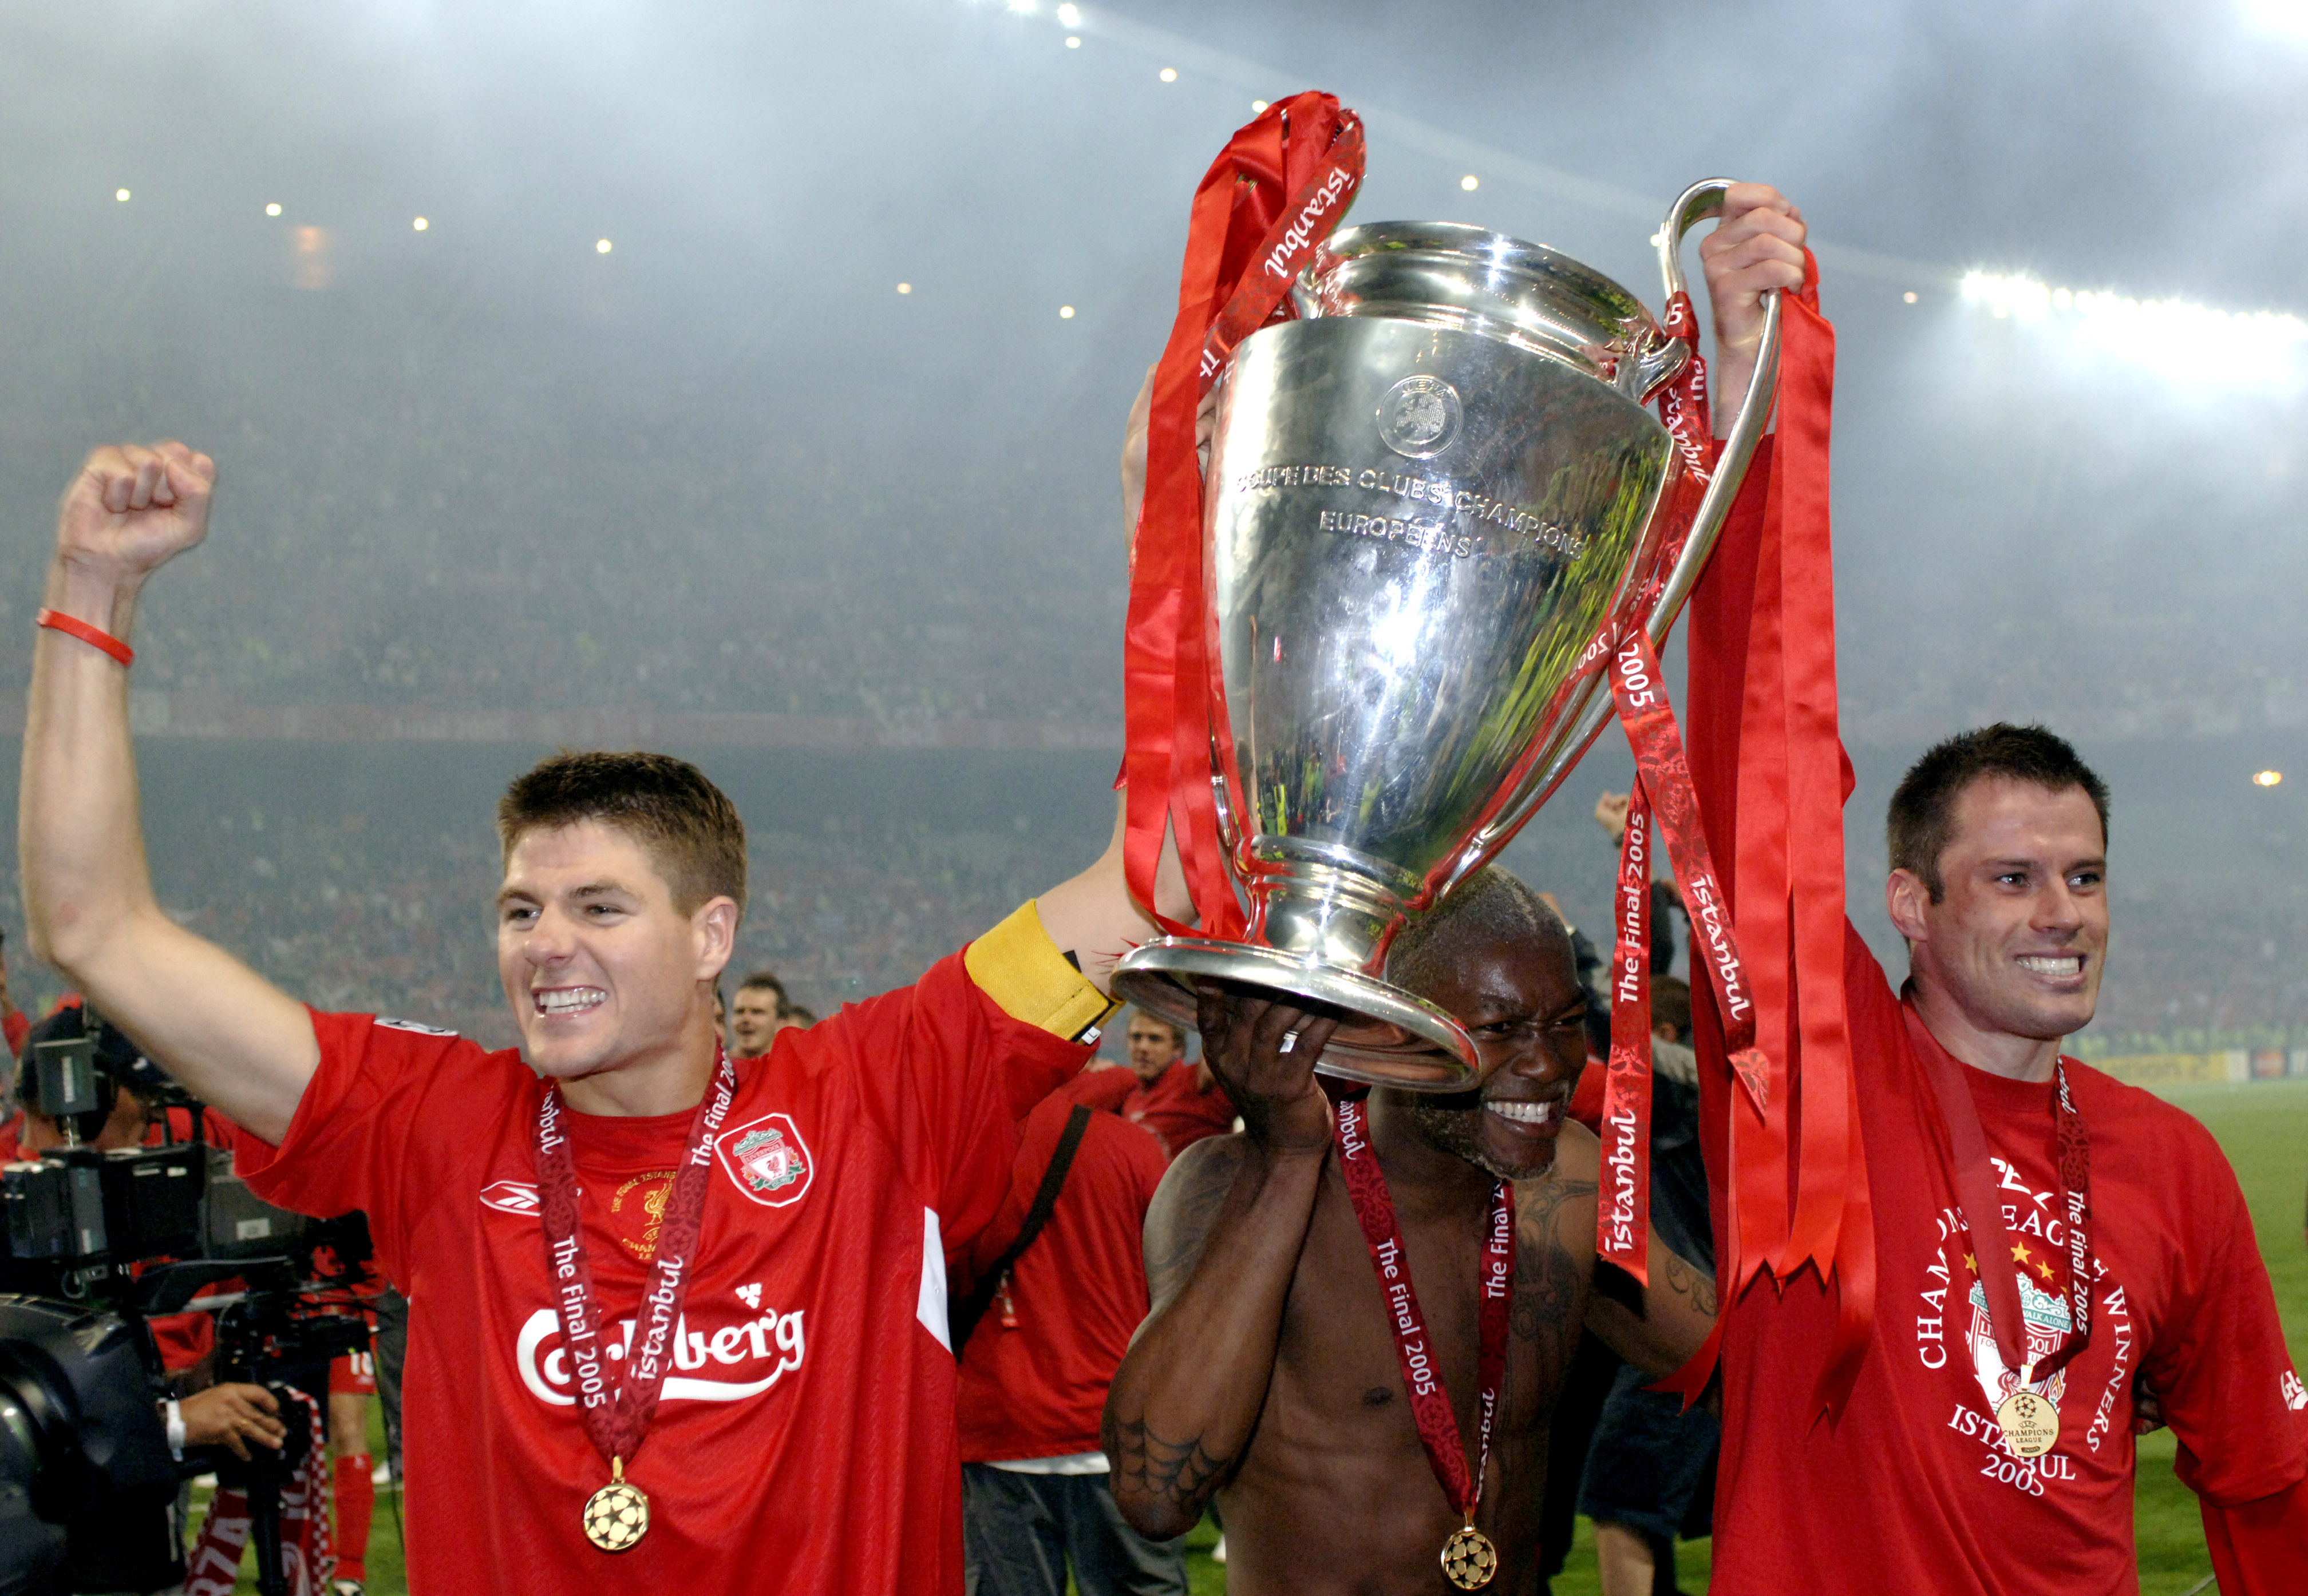 BT Sport, Football, UEFA Champions League Final, 25th May 2005, Ataturk Stadium, Istanbul, AC Milan 3 v Liverpool 3, ( Liverpool won 3-2 on penalties), Liverpool captain Steven Gerrard and Jamie Carragher celebrate with the trophy